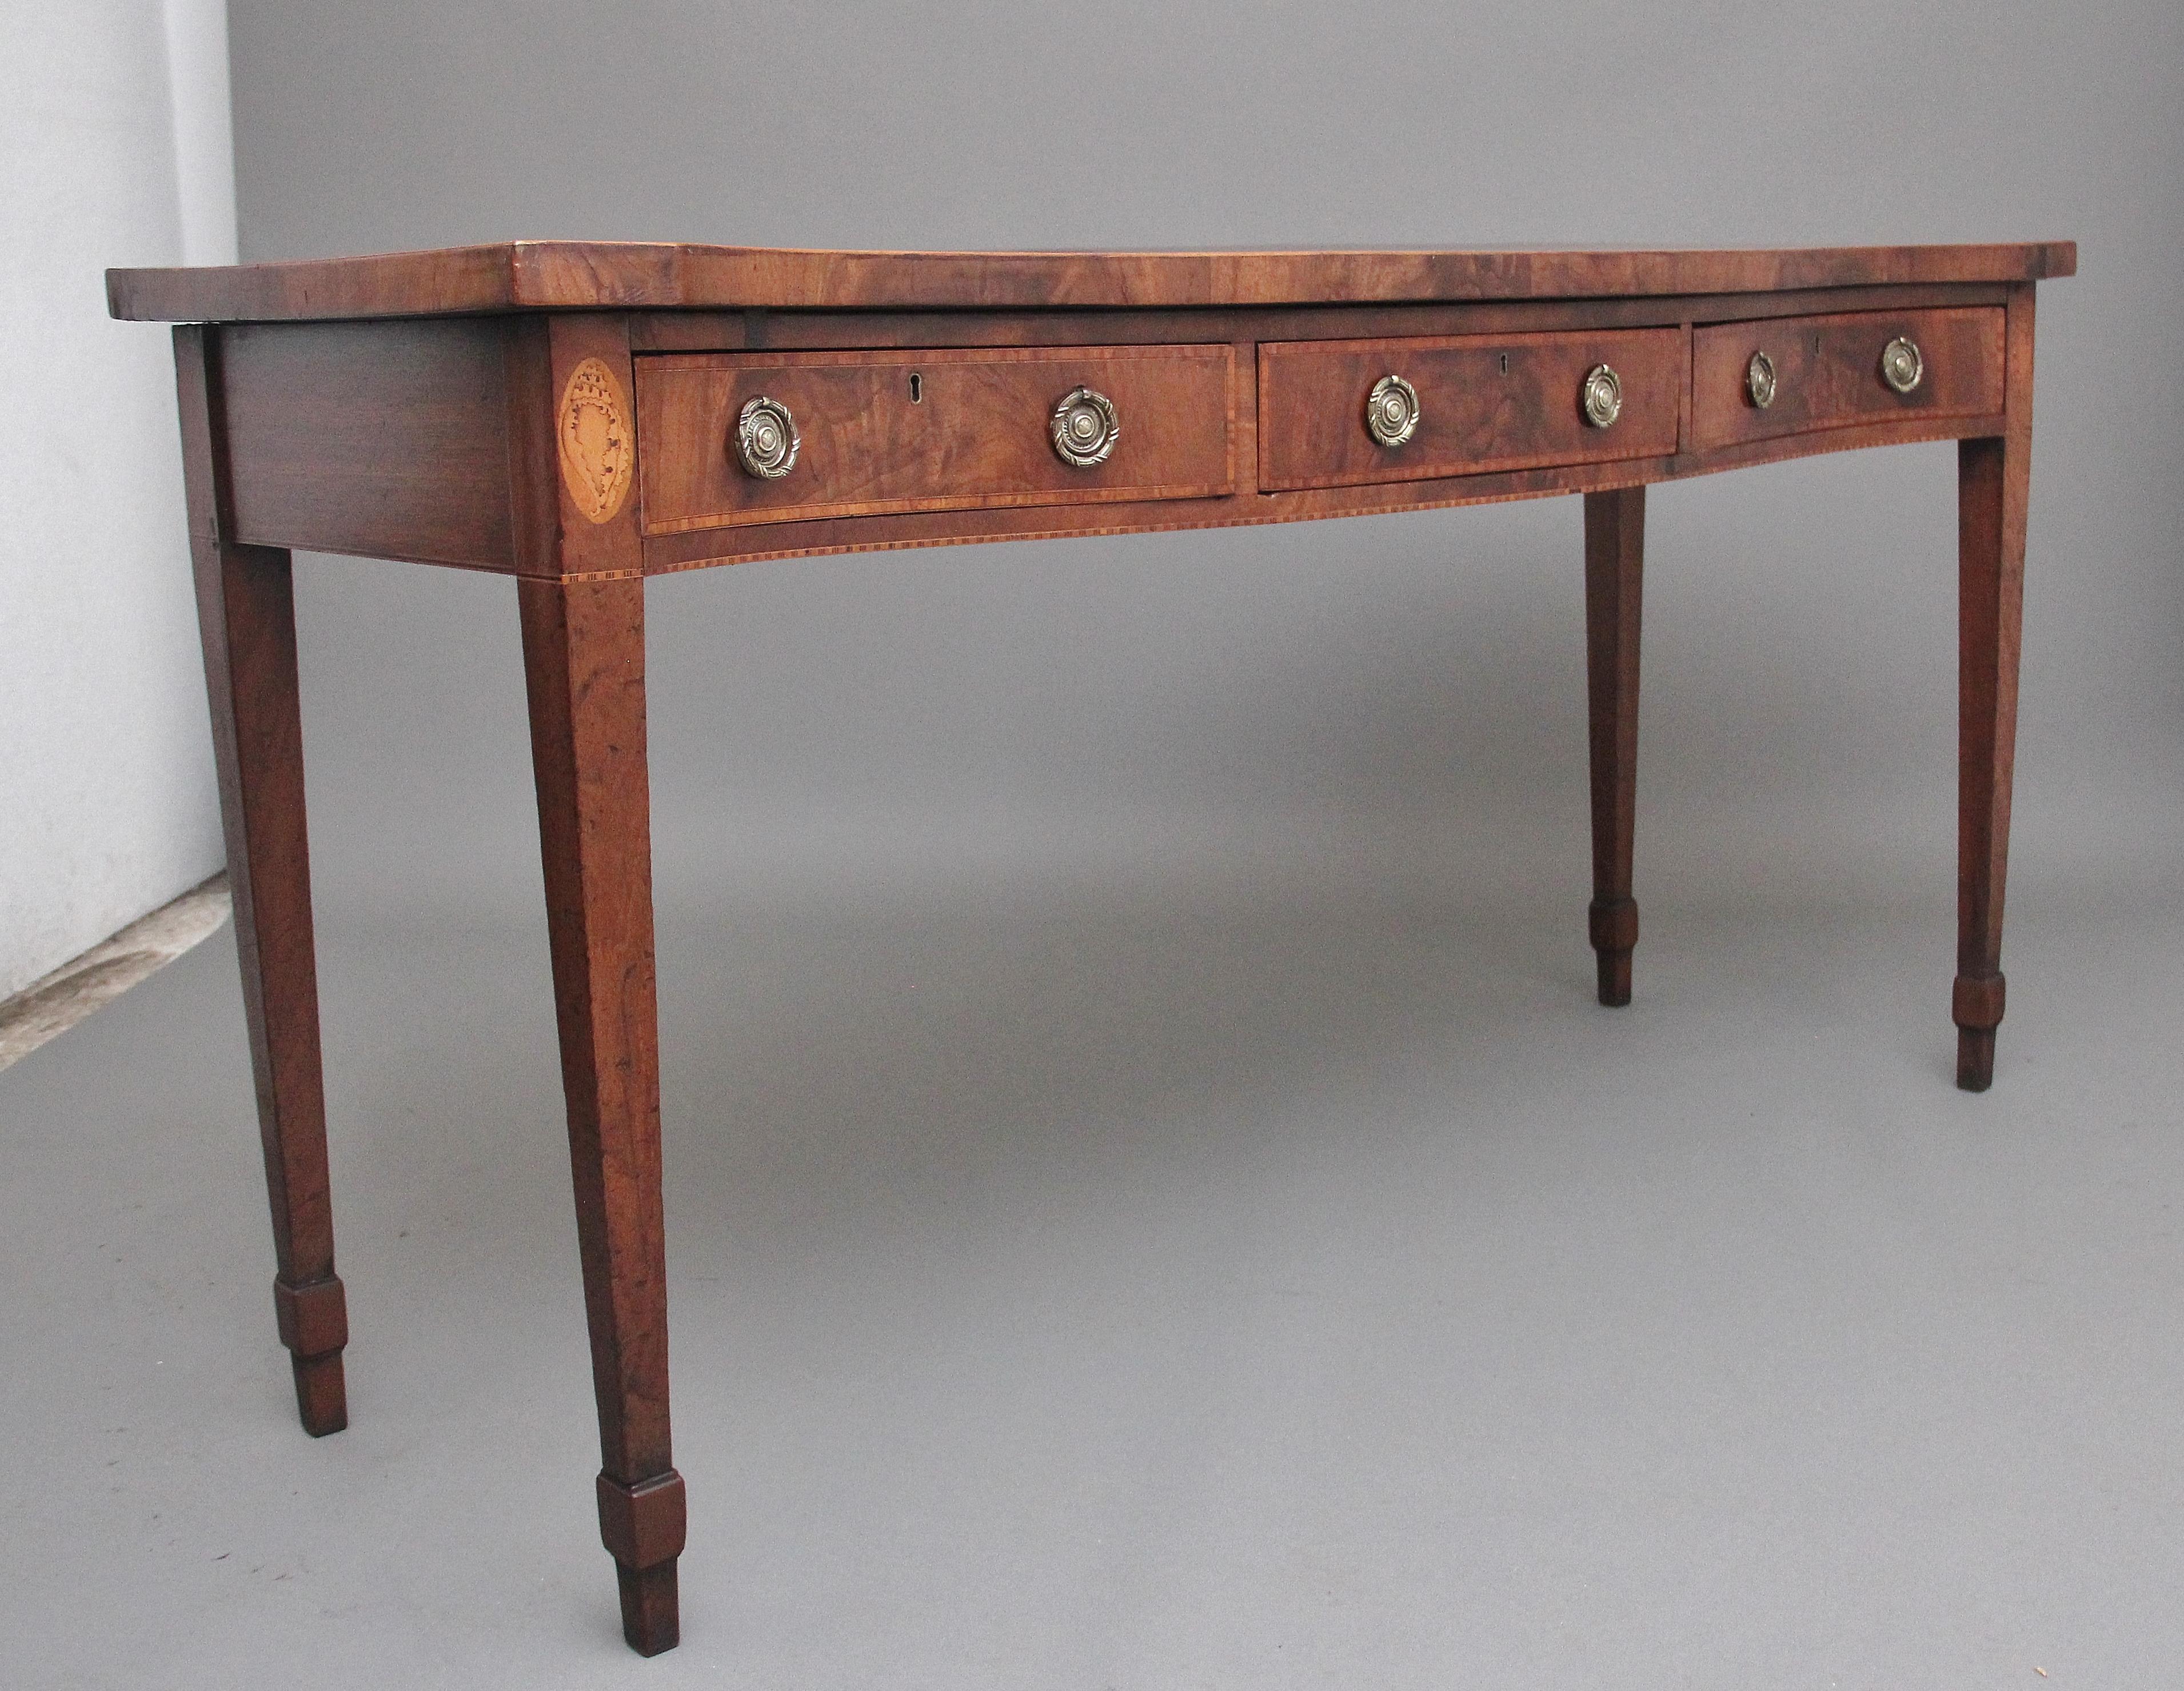 British Superb Quality Early 19th Century Mahogany Serpentine Serving Table